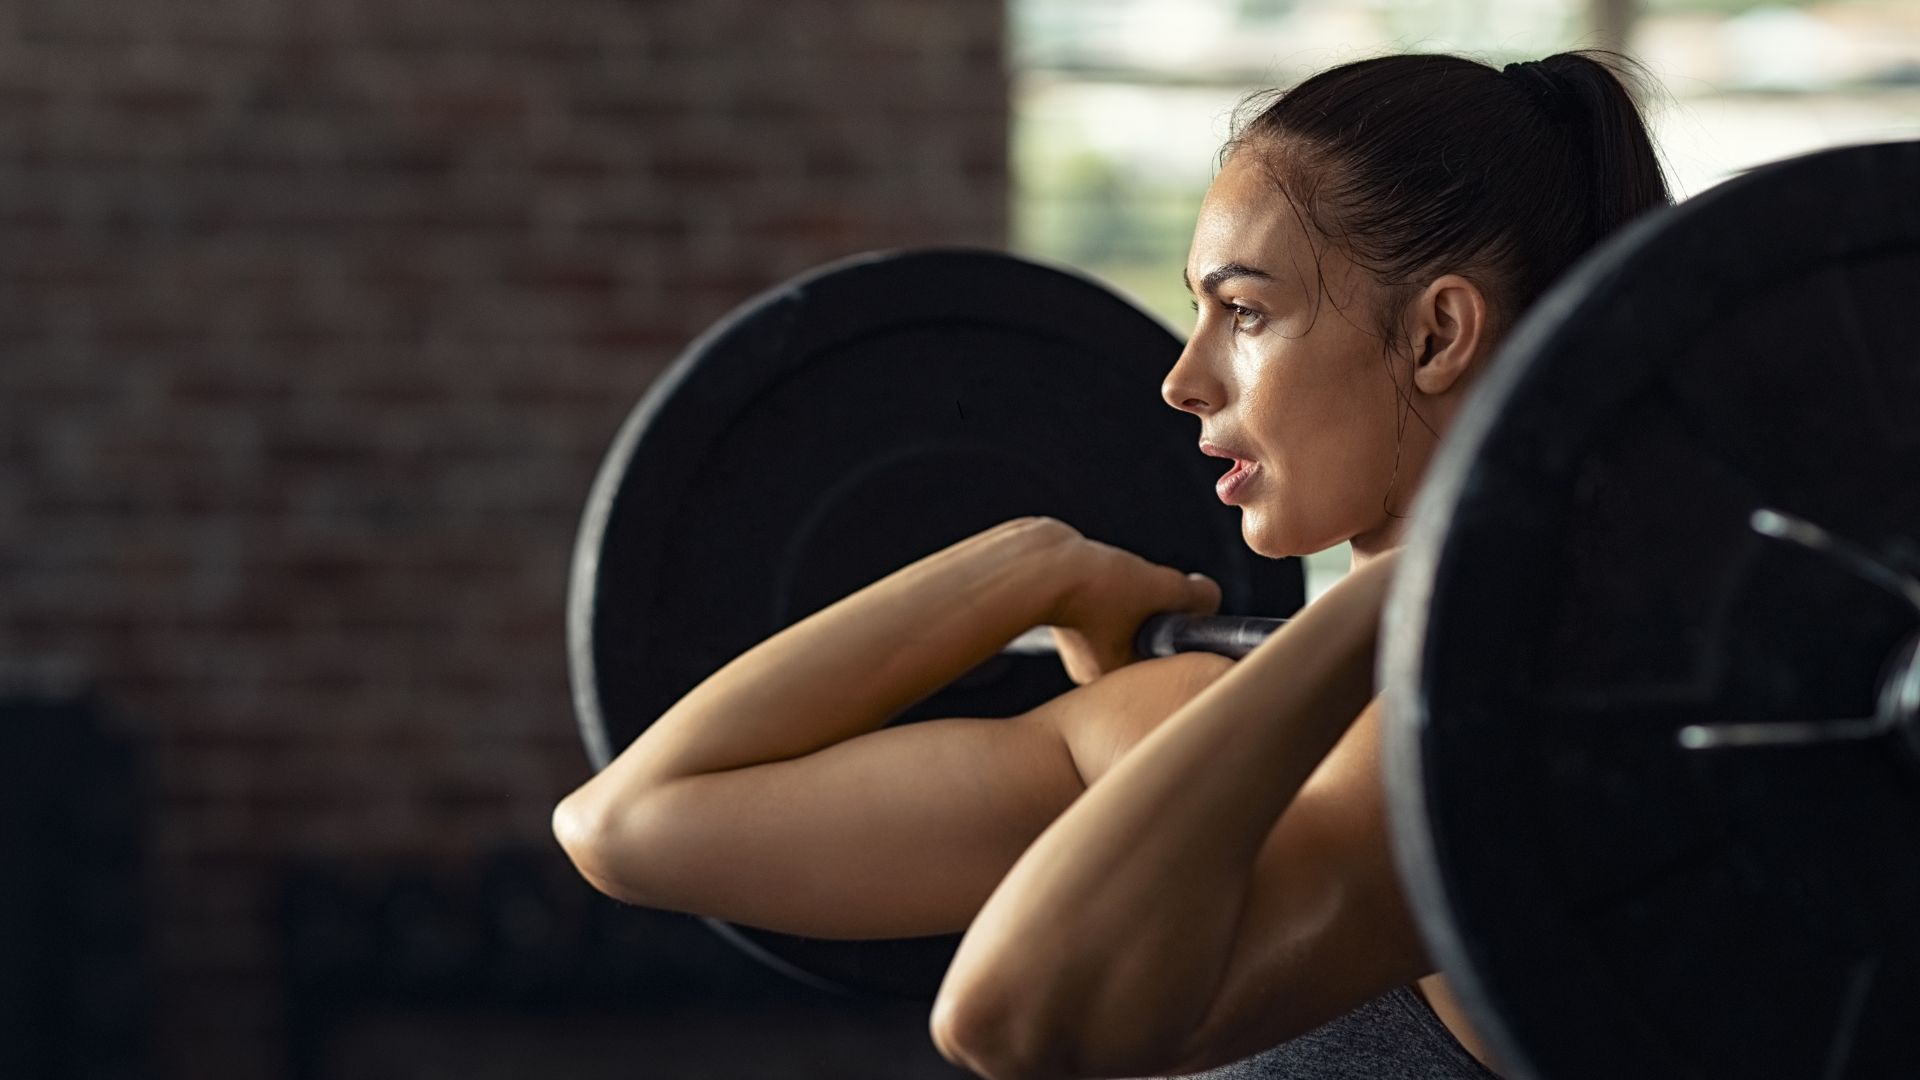 Study Reveals: Women Achieve Significant Long-Term Health Gains with Less Gym Effort